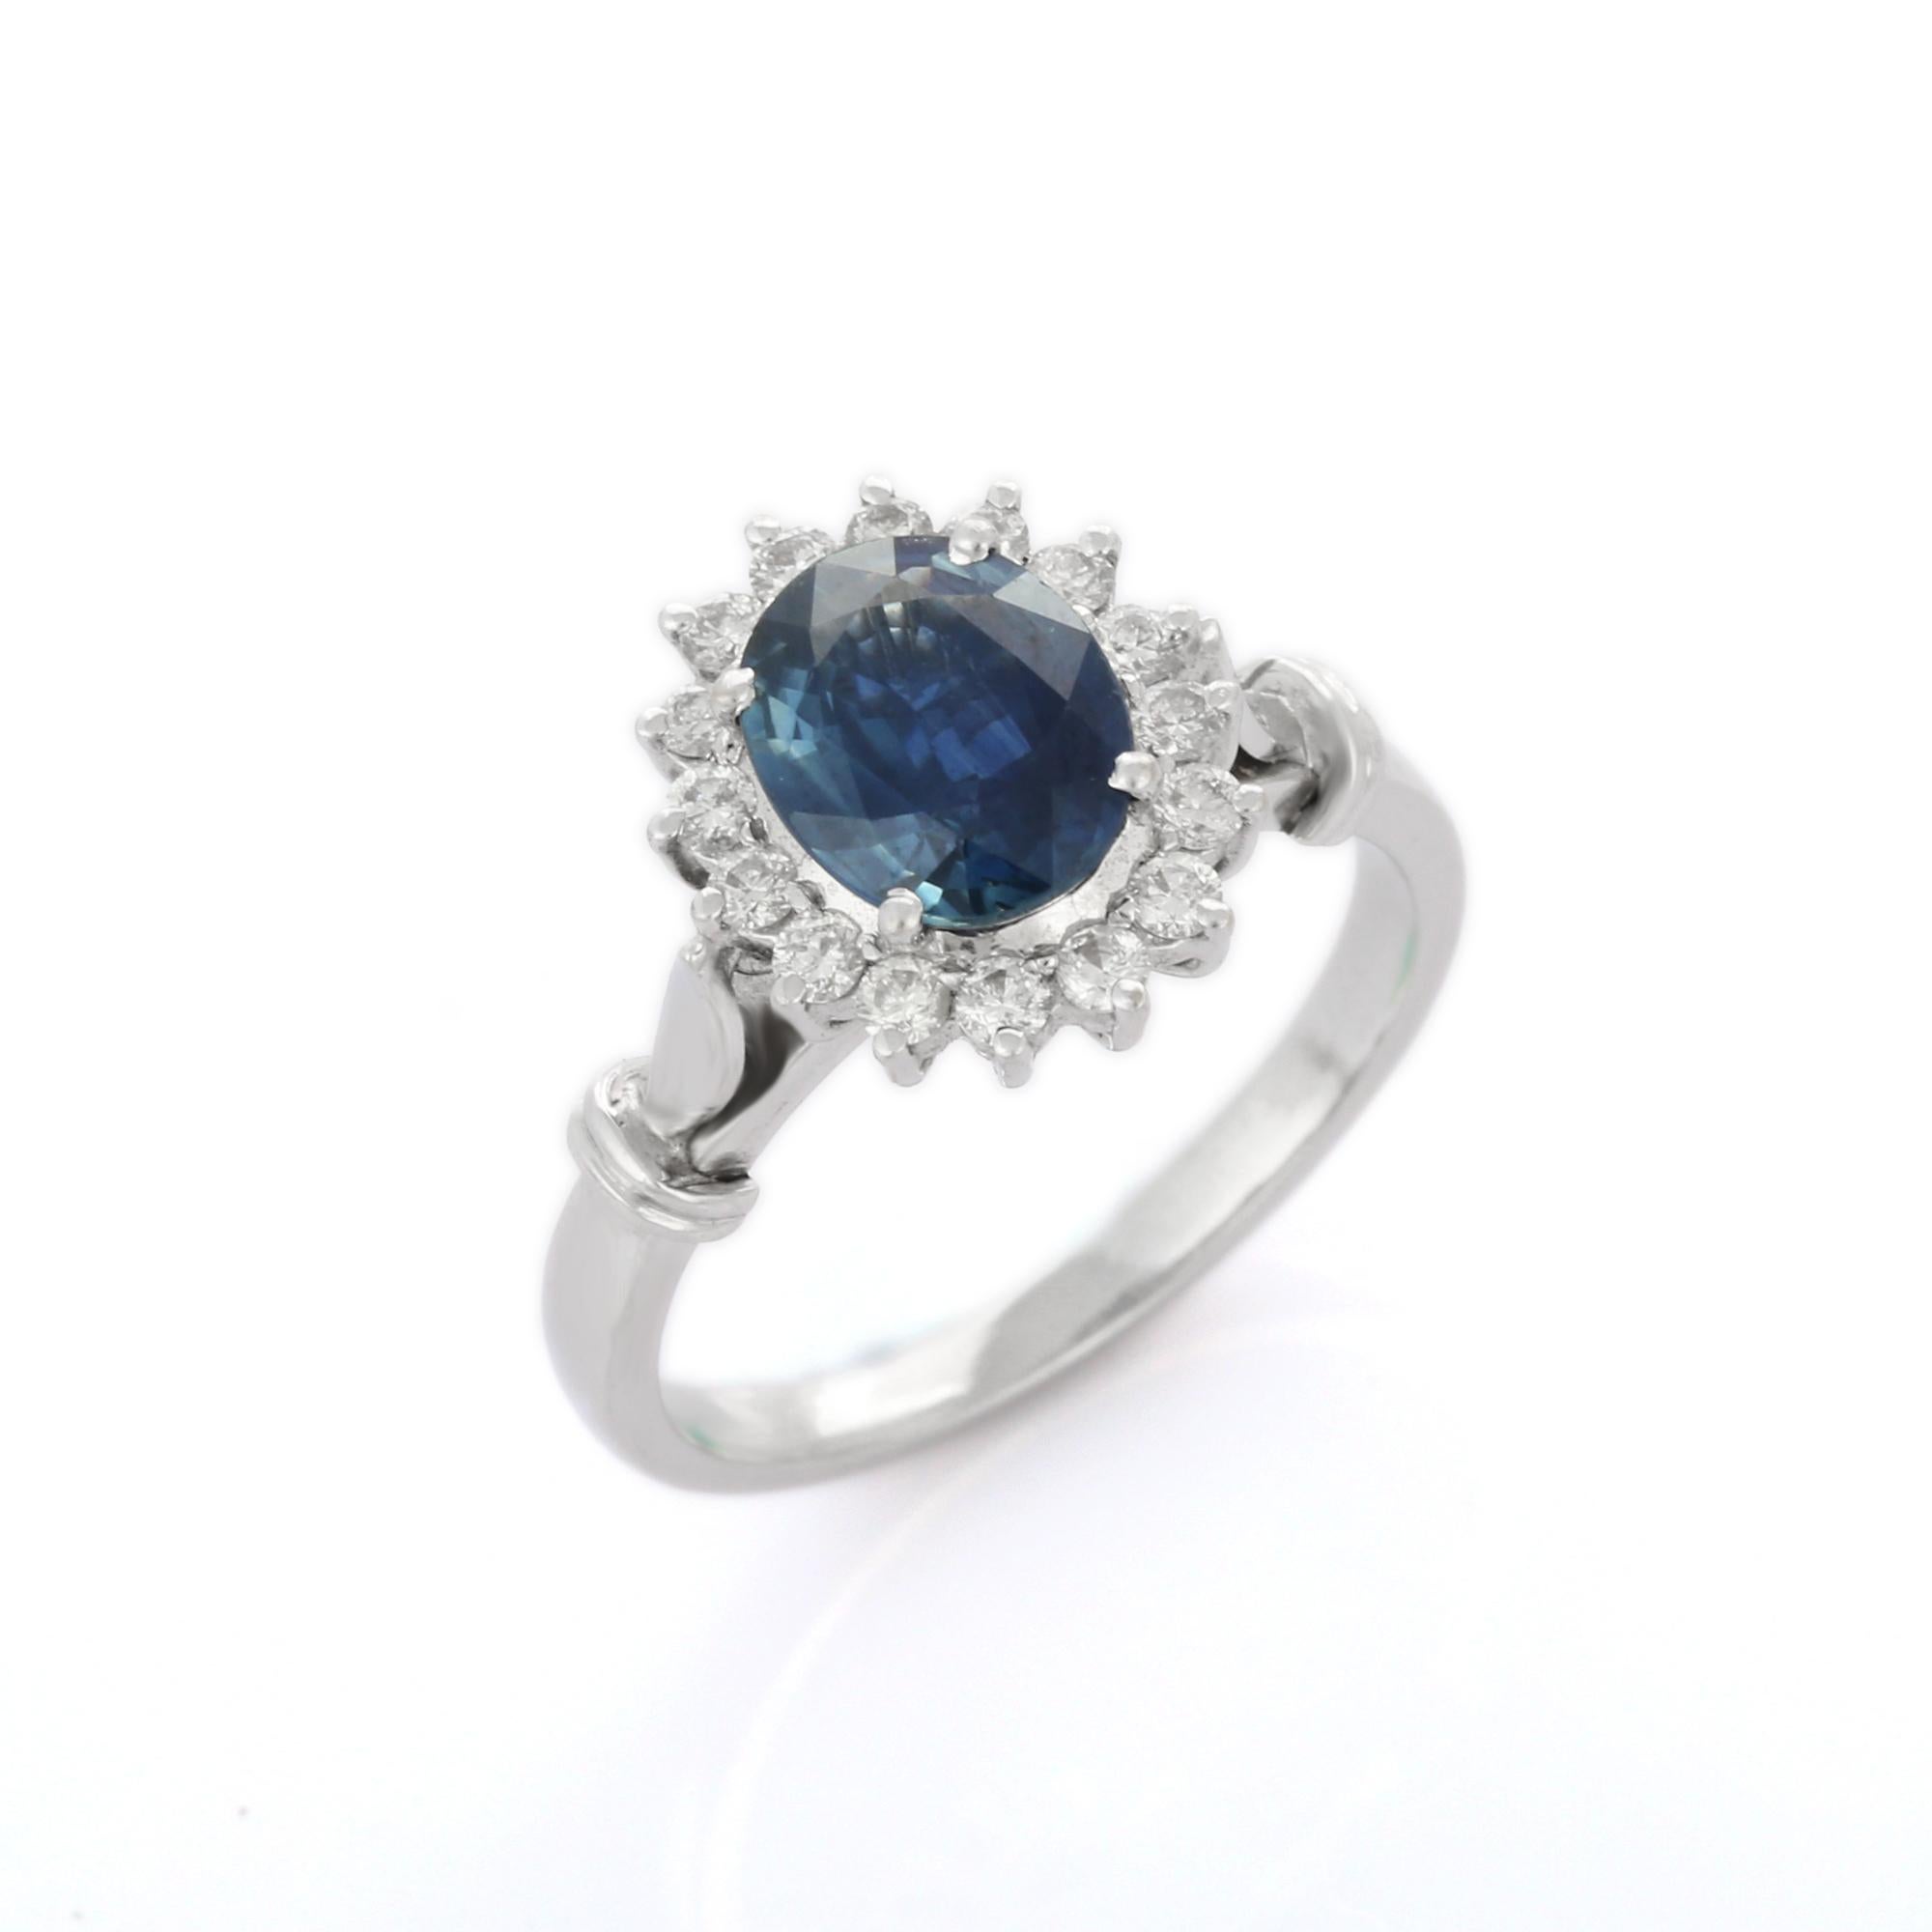 For Sale:  Royal Deep Blue Sapphire Betwixt Diamond Engagement Ring in 18K White Gold 4